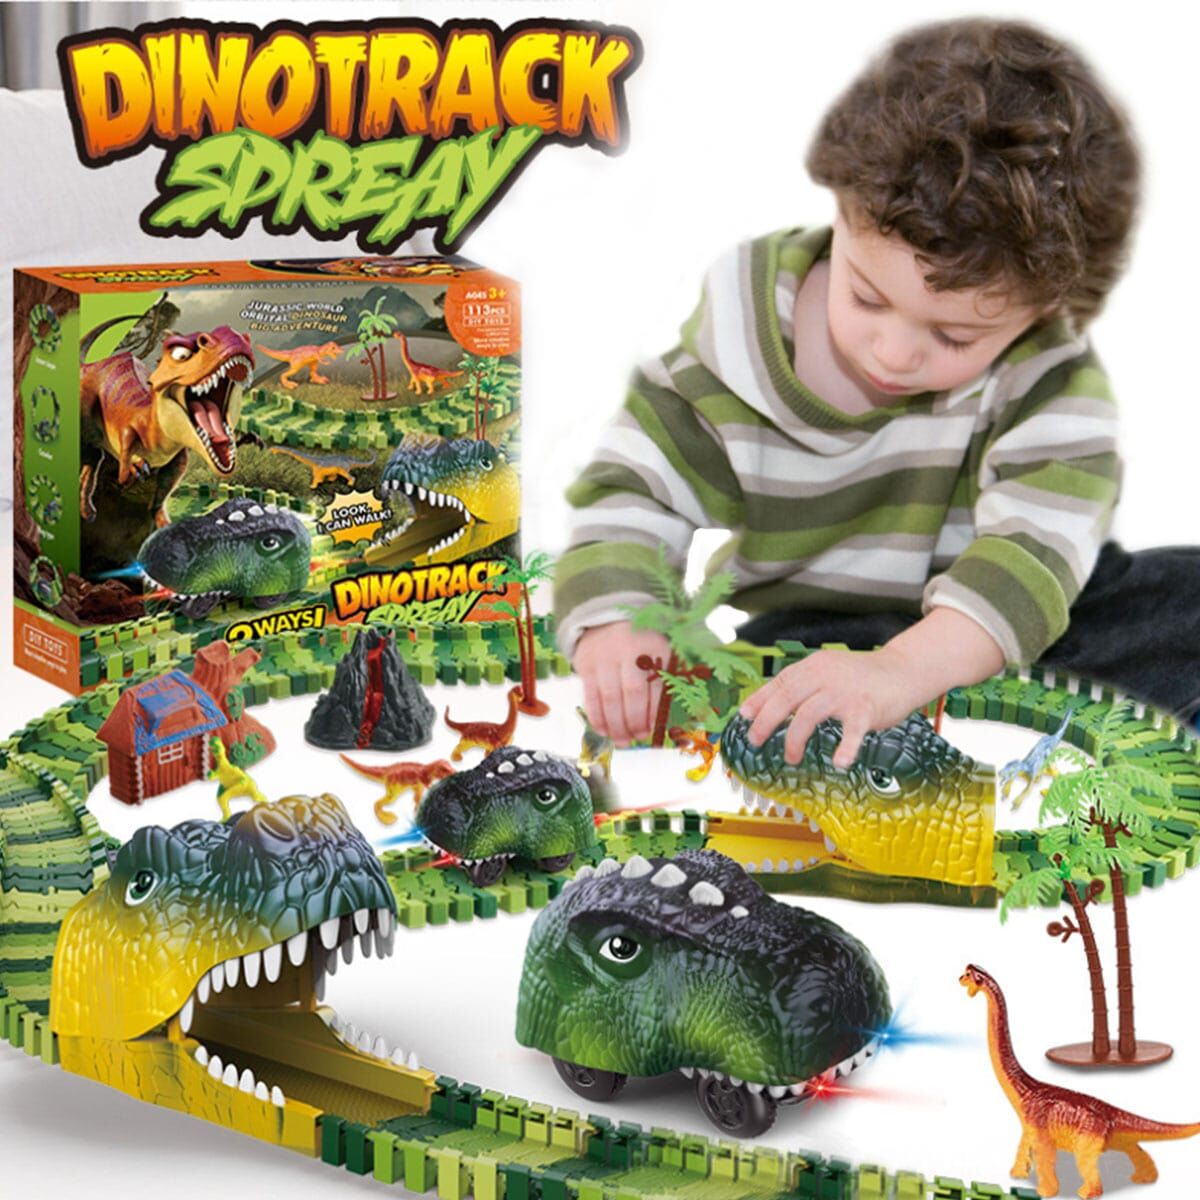 SHEIN 113 PCS Dinosaur Toys Race Track, Flexible Train Tracks with 8 Dinosaurs Figures, 1 Electric Race Cars Vehicle Playset with Lights to Create A Dinosaur World 3-6 Year & Up Old Boys Girls Kids Gift Green one-size